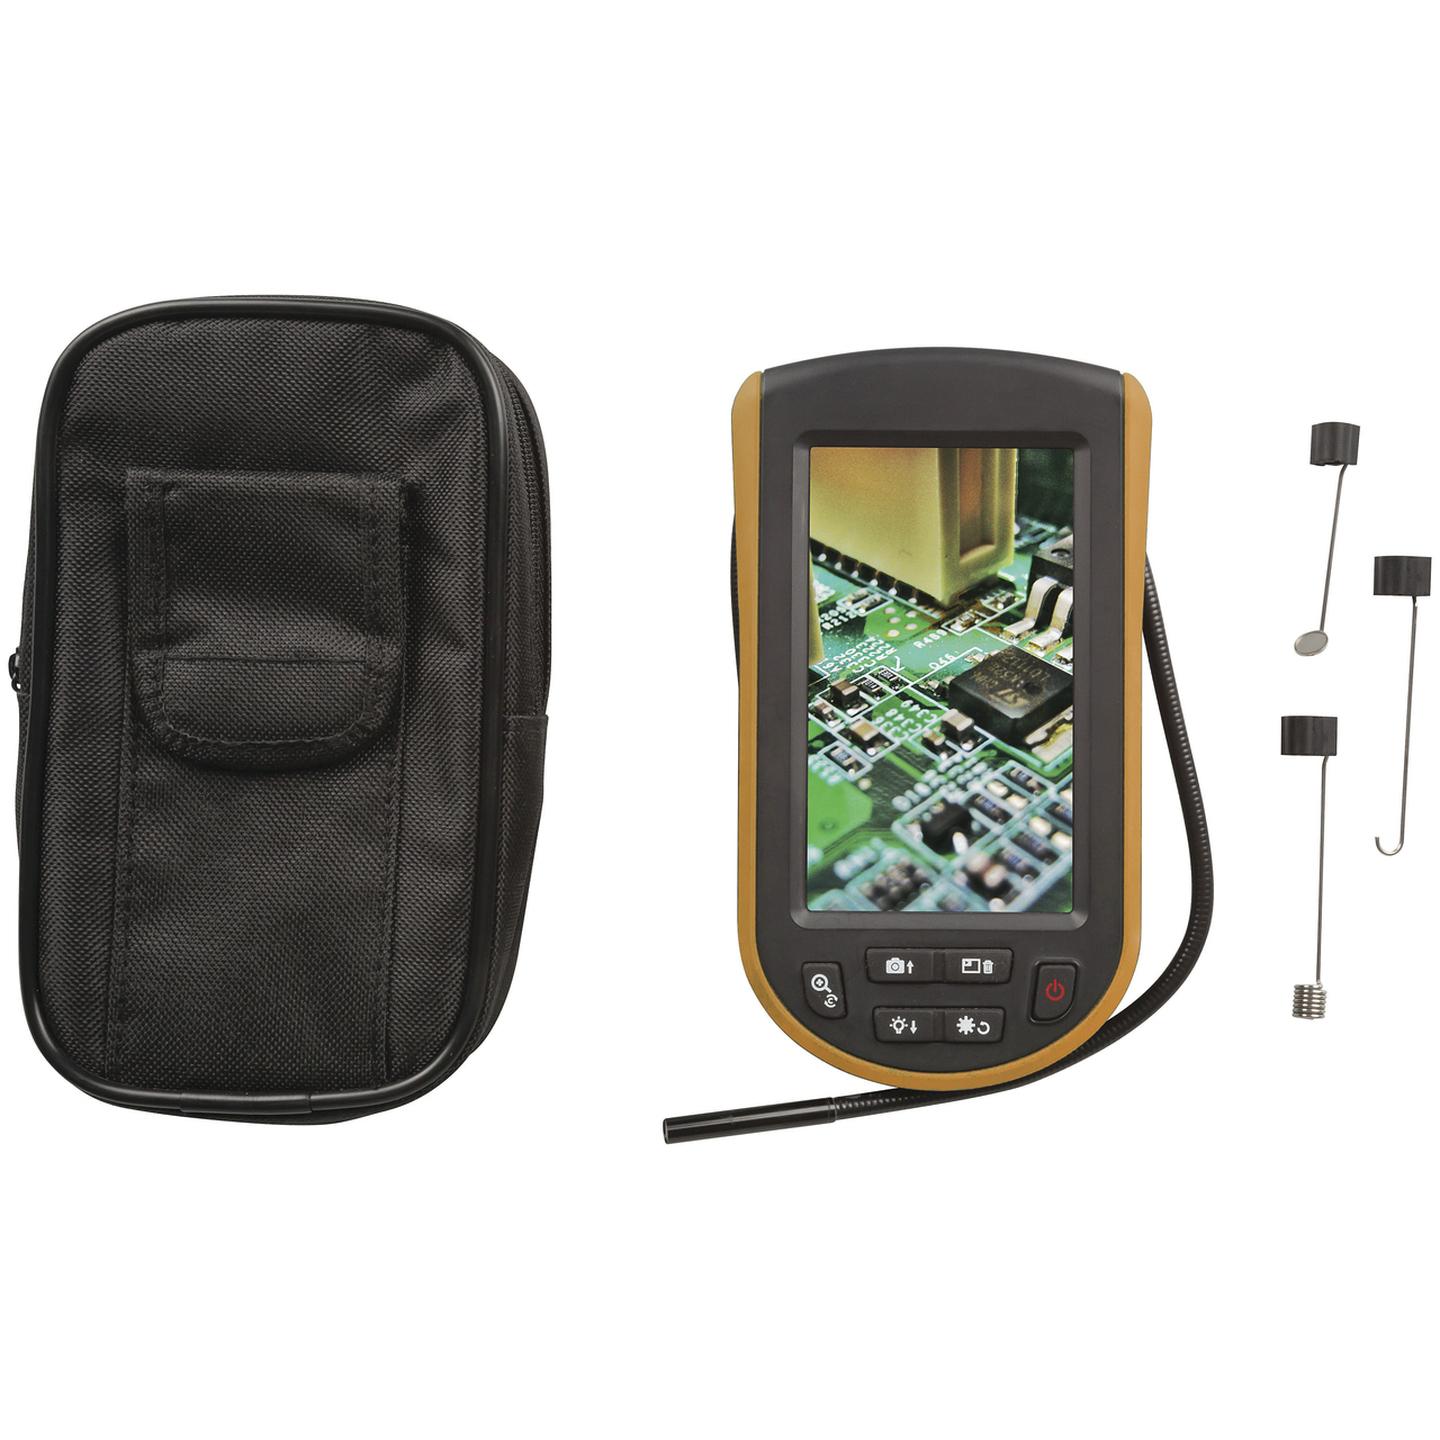 Inspection Camera with 4.3 Inch LCD and Record/Snapshot Function